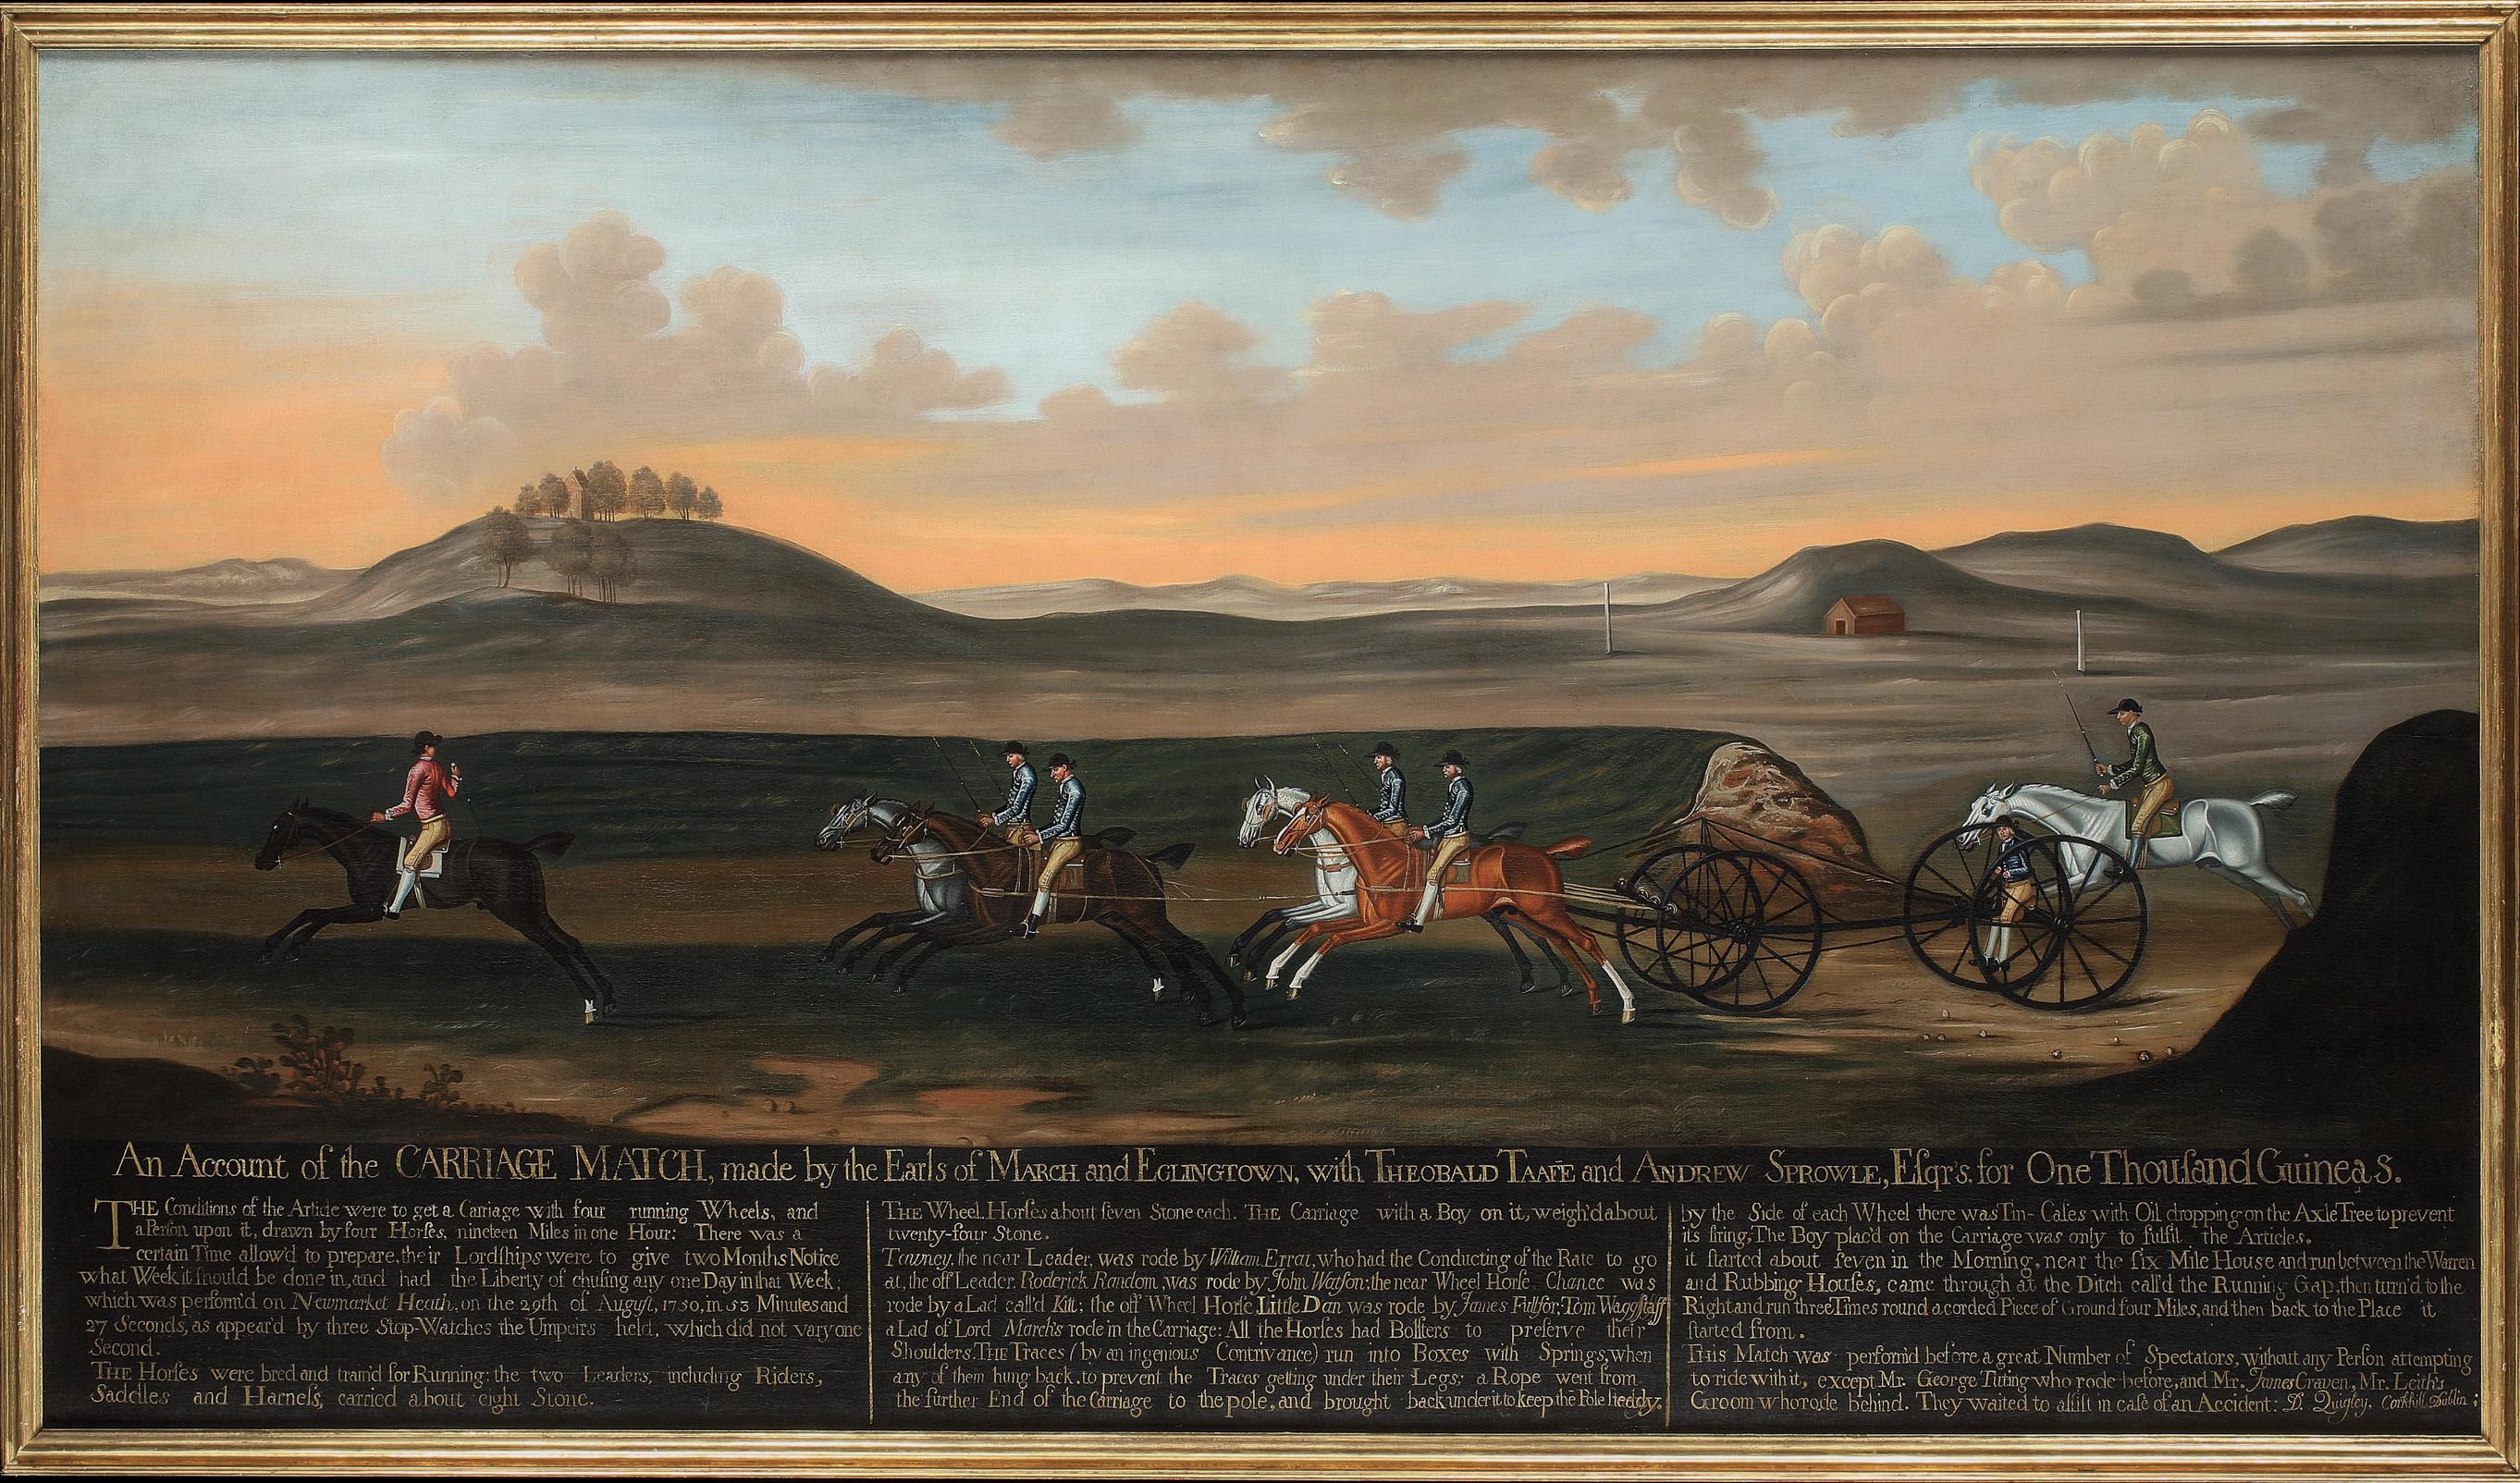 Run by the Earls of March and Eglington on the 29th March, 1750

Daniel Quigley, Irish (fl. 1750-1773)

The inscription on the painting (giving the account of the match) reads:

An account of the Carriage Match made by the Earls of March and